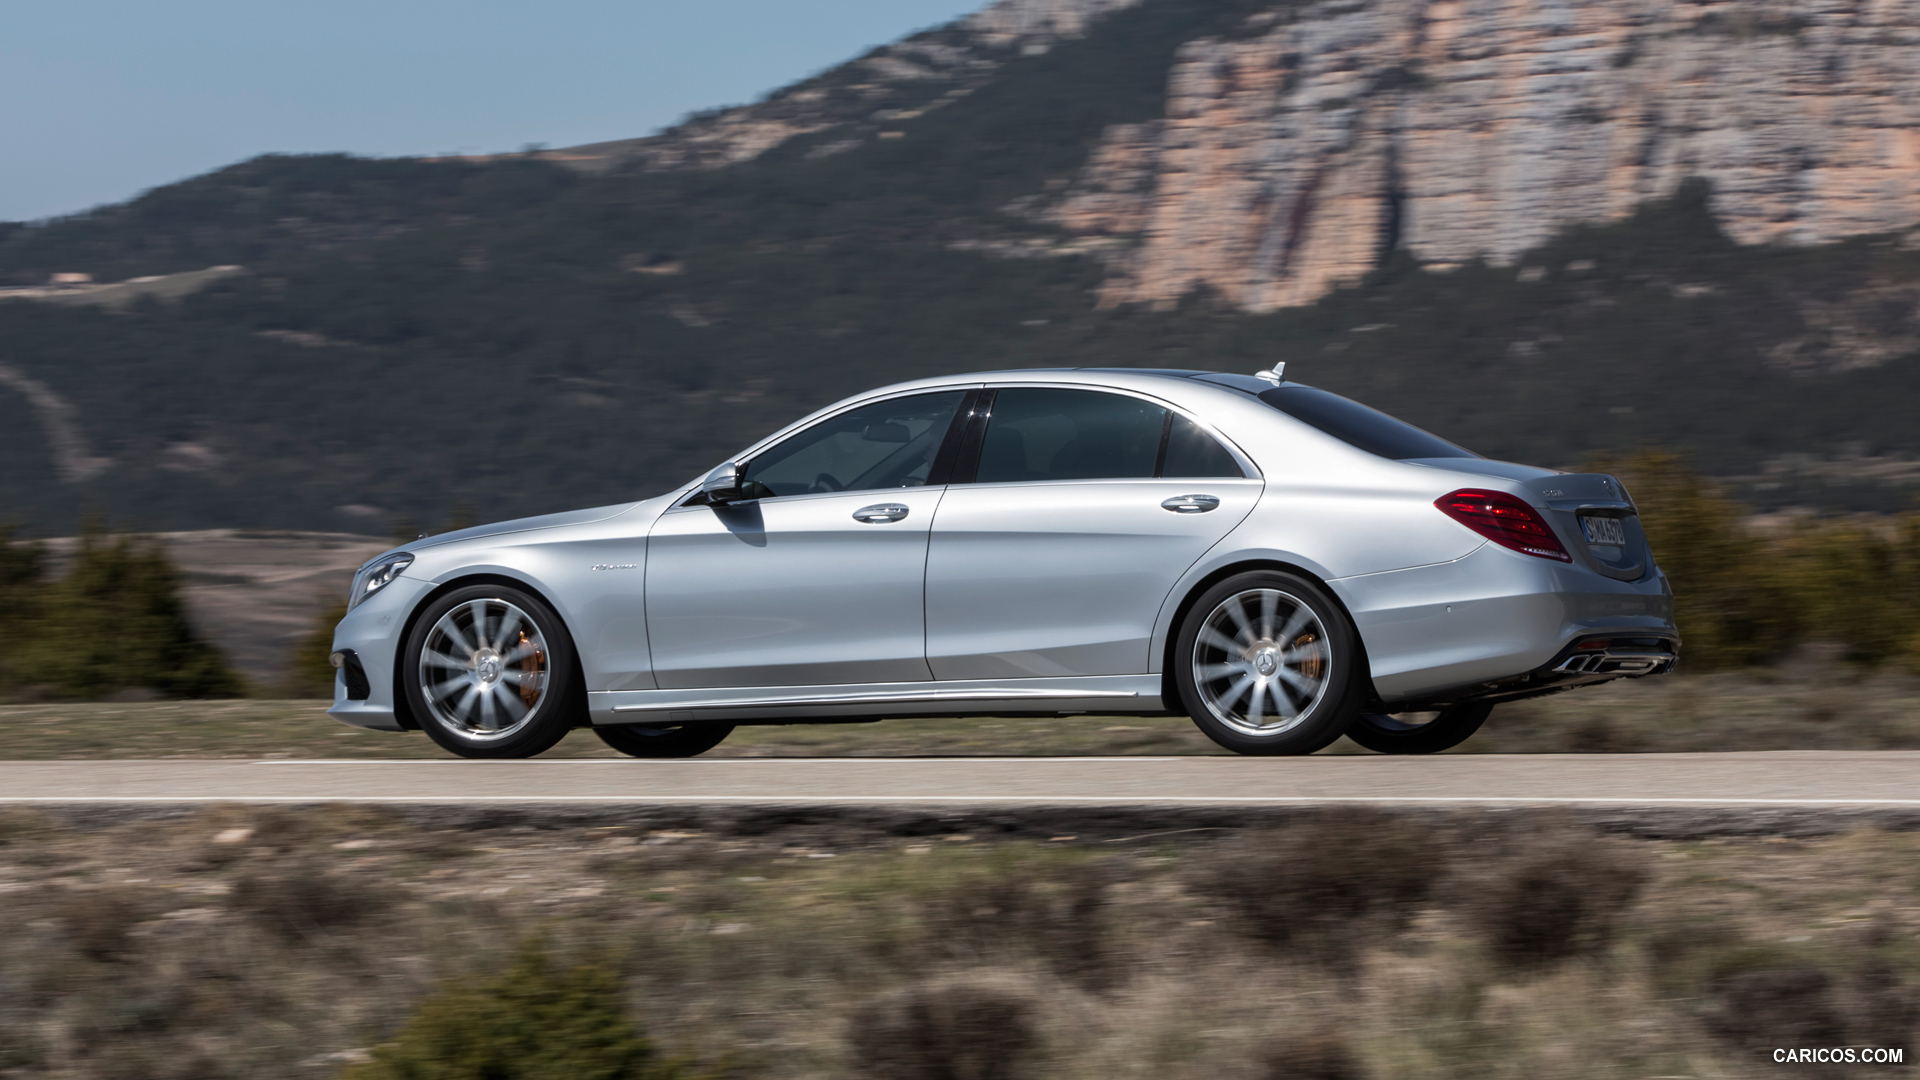 Mercedes-Benz S63 AMG W222 (2014)  - Side, #9 of 102